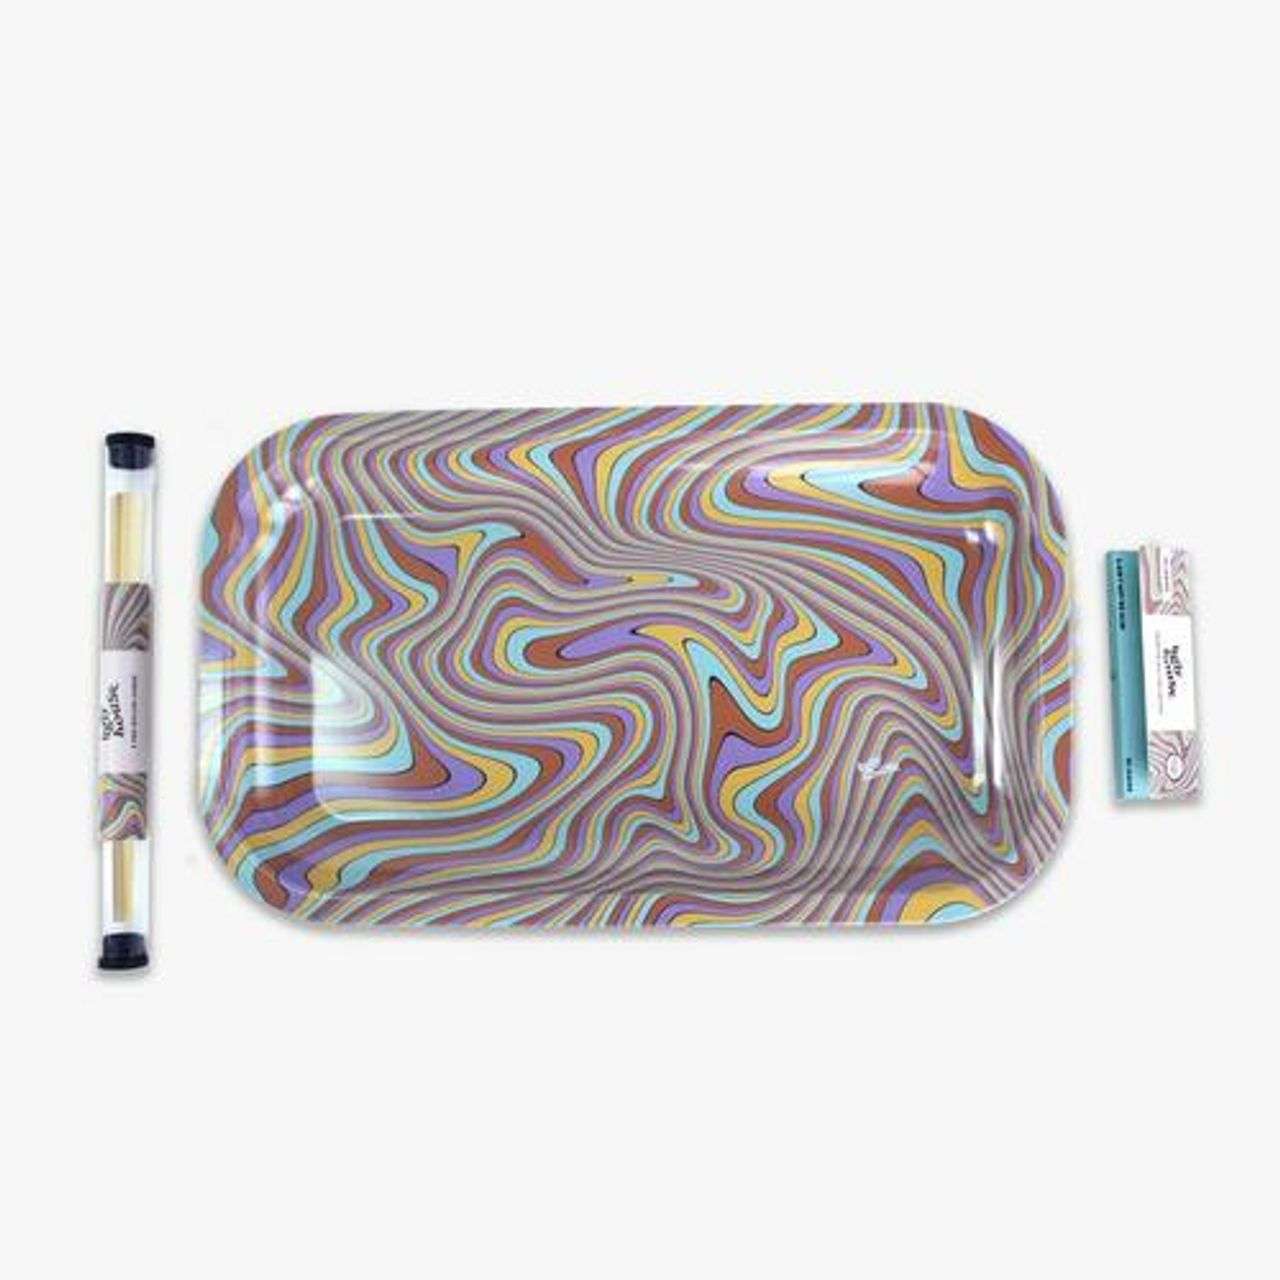 LARGE HOLOGRAPHIC UGLY HOUSE ROLLING TRAY WITH LID/CONES/PAPERS (I'D HIT THAT/STRIPES) 10.6X6.3